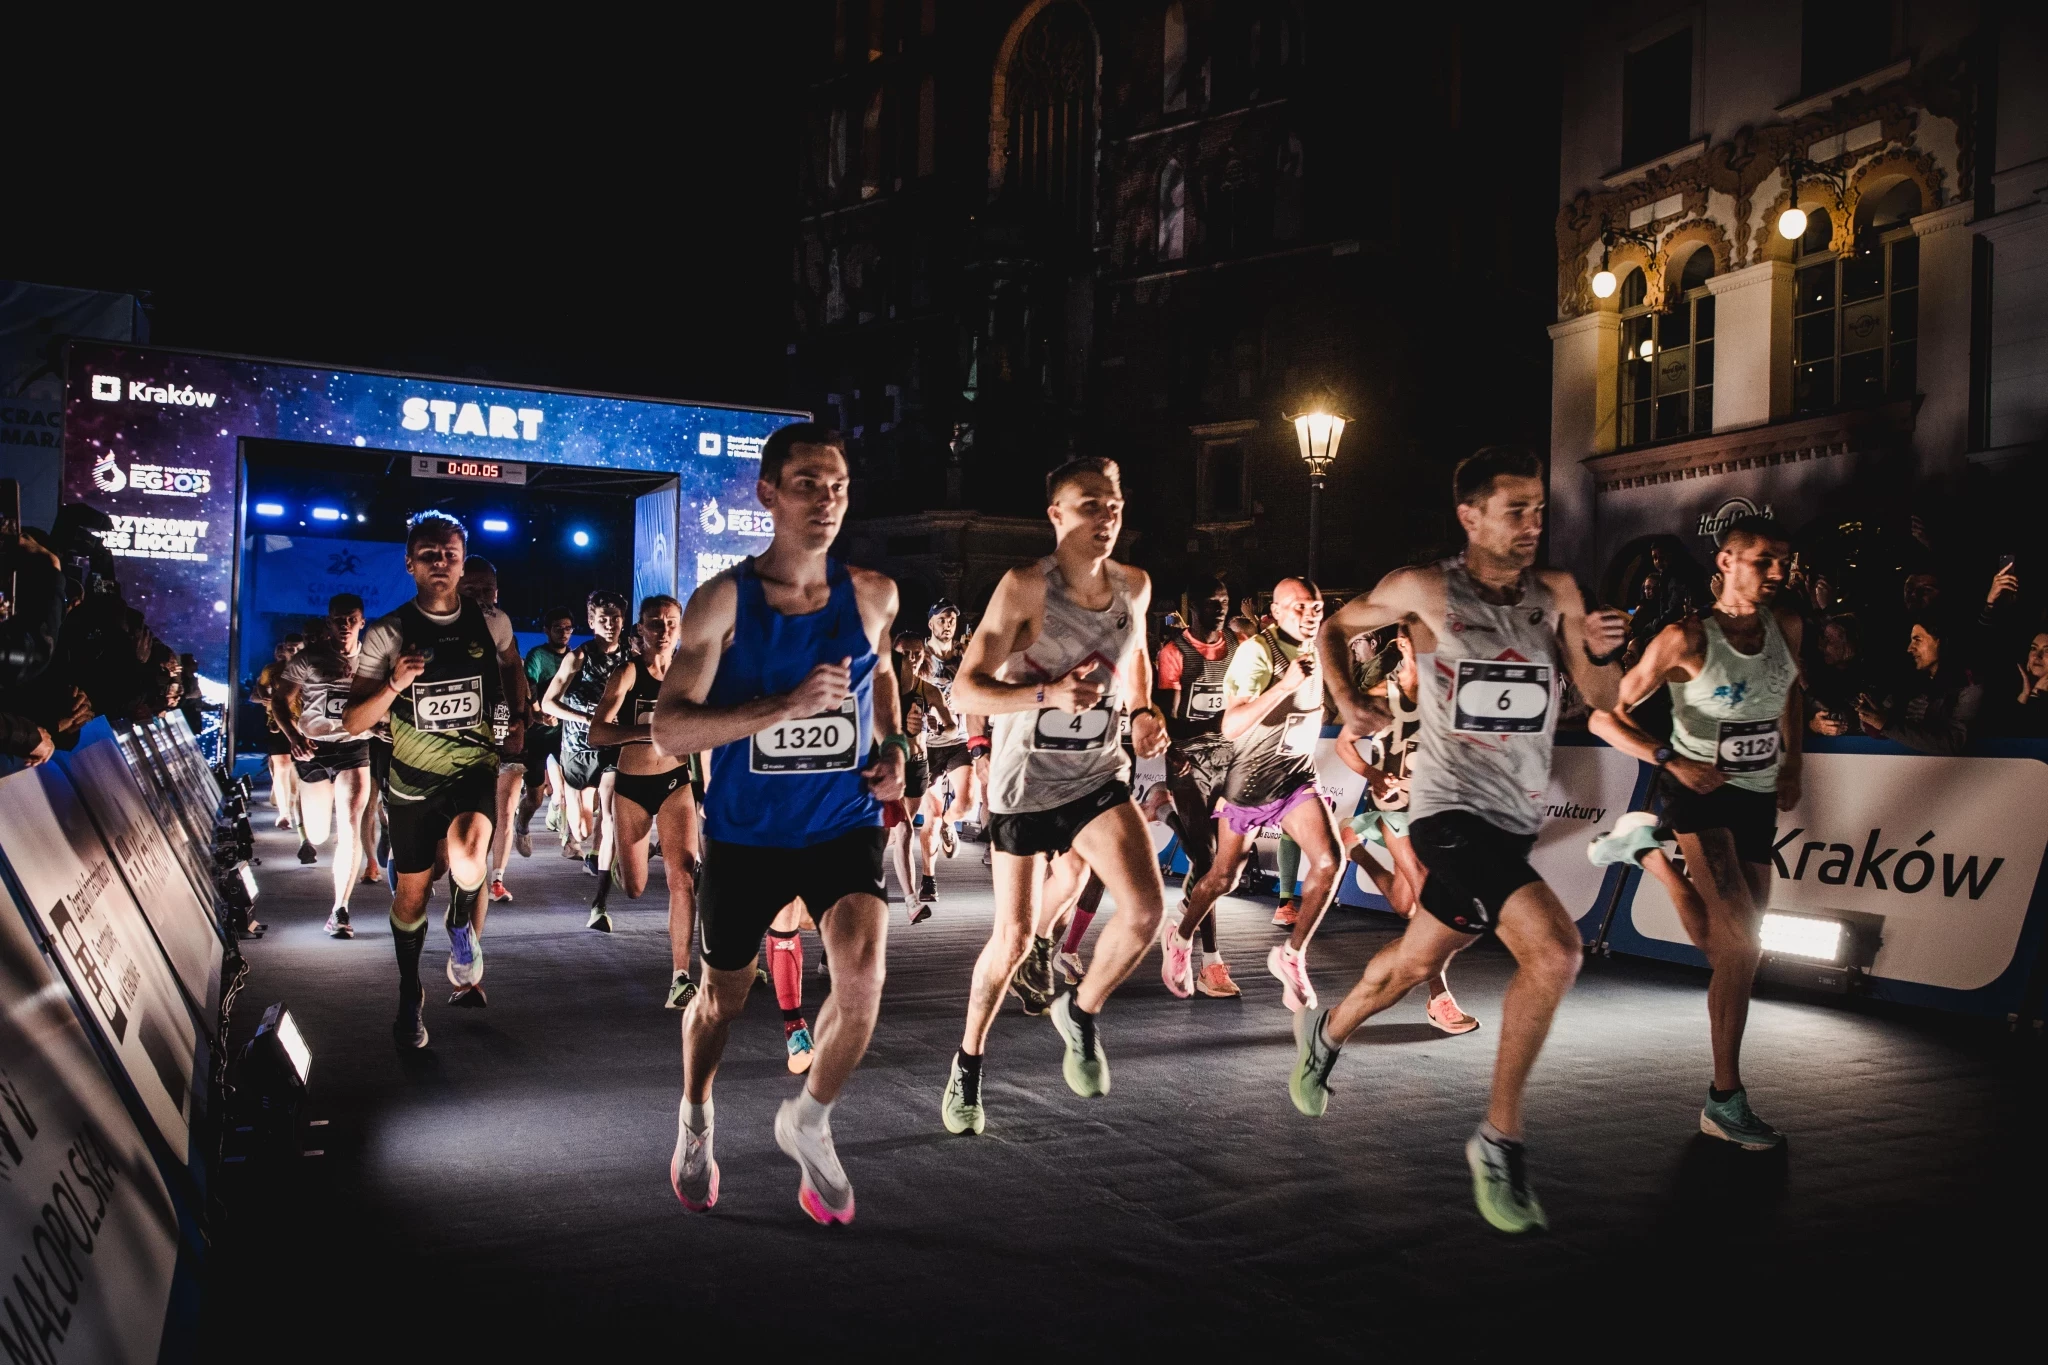 Kraków-Małopolska 2023 Organising Committee President Marcin Nowak hopes that events such as the Night Run will build excitement for the upcoming European Games ©EOC